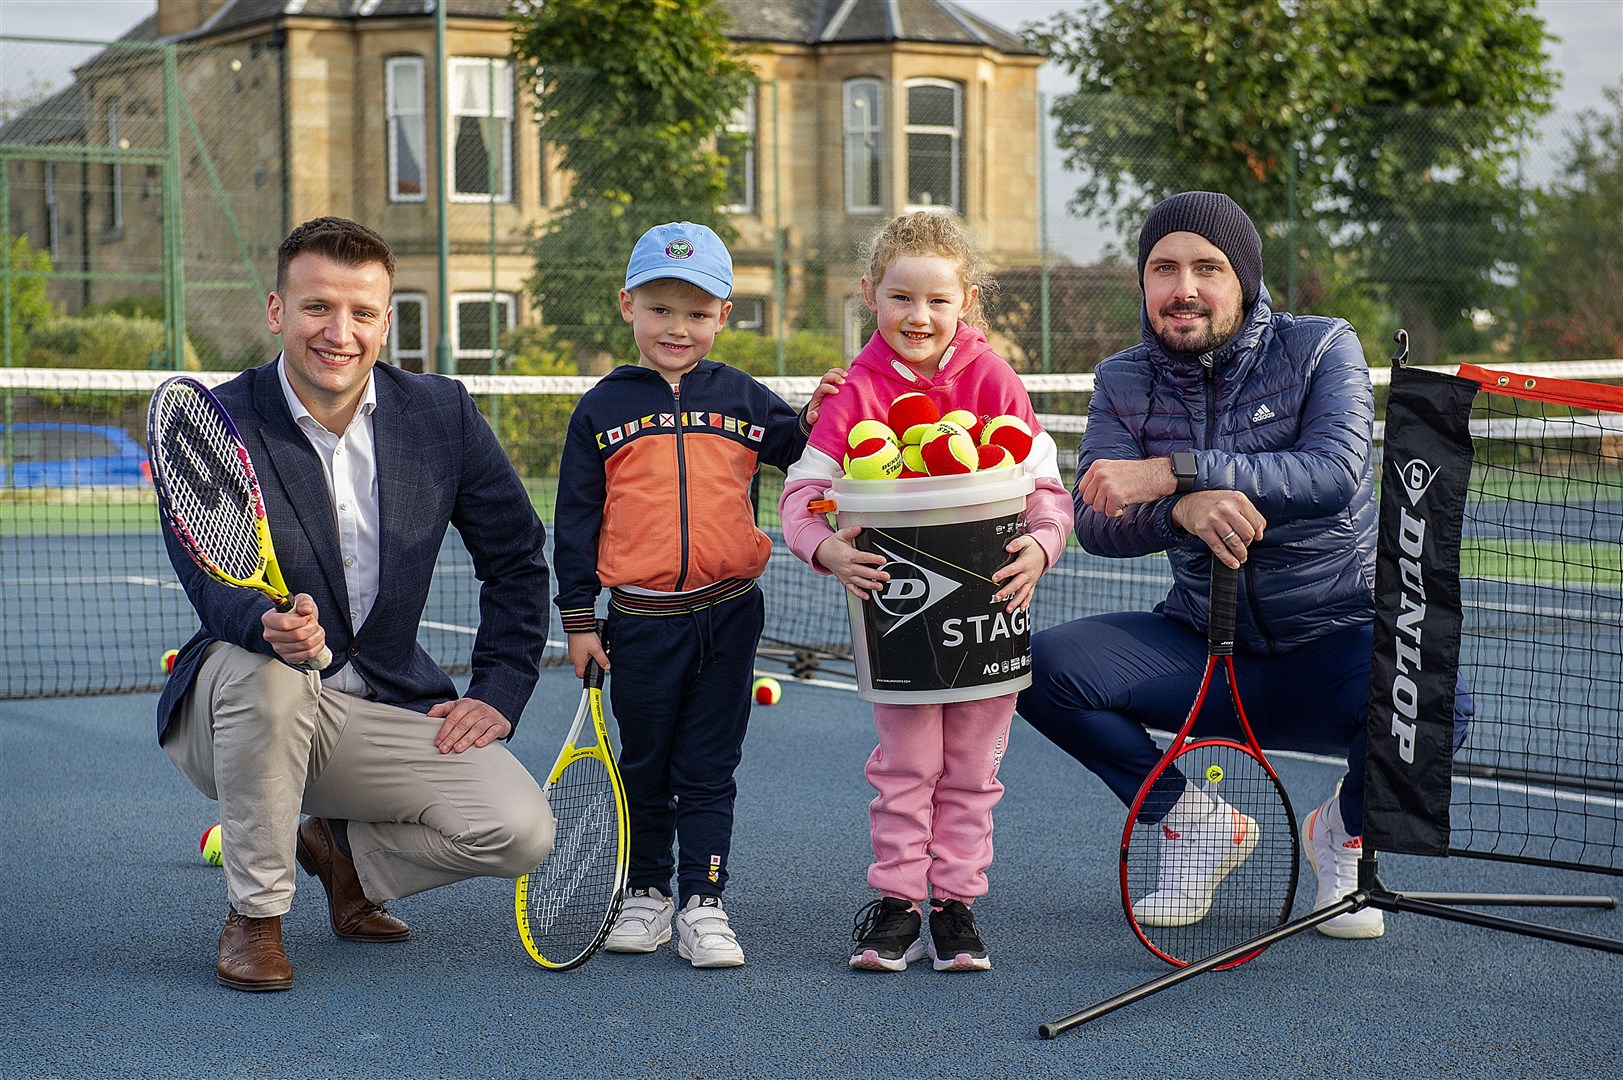 Falkirk Lawn Tennis Club received a £2500 donation from the Aldi Scottish Sports Fund last year.